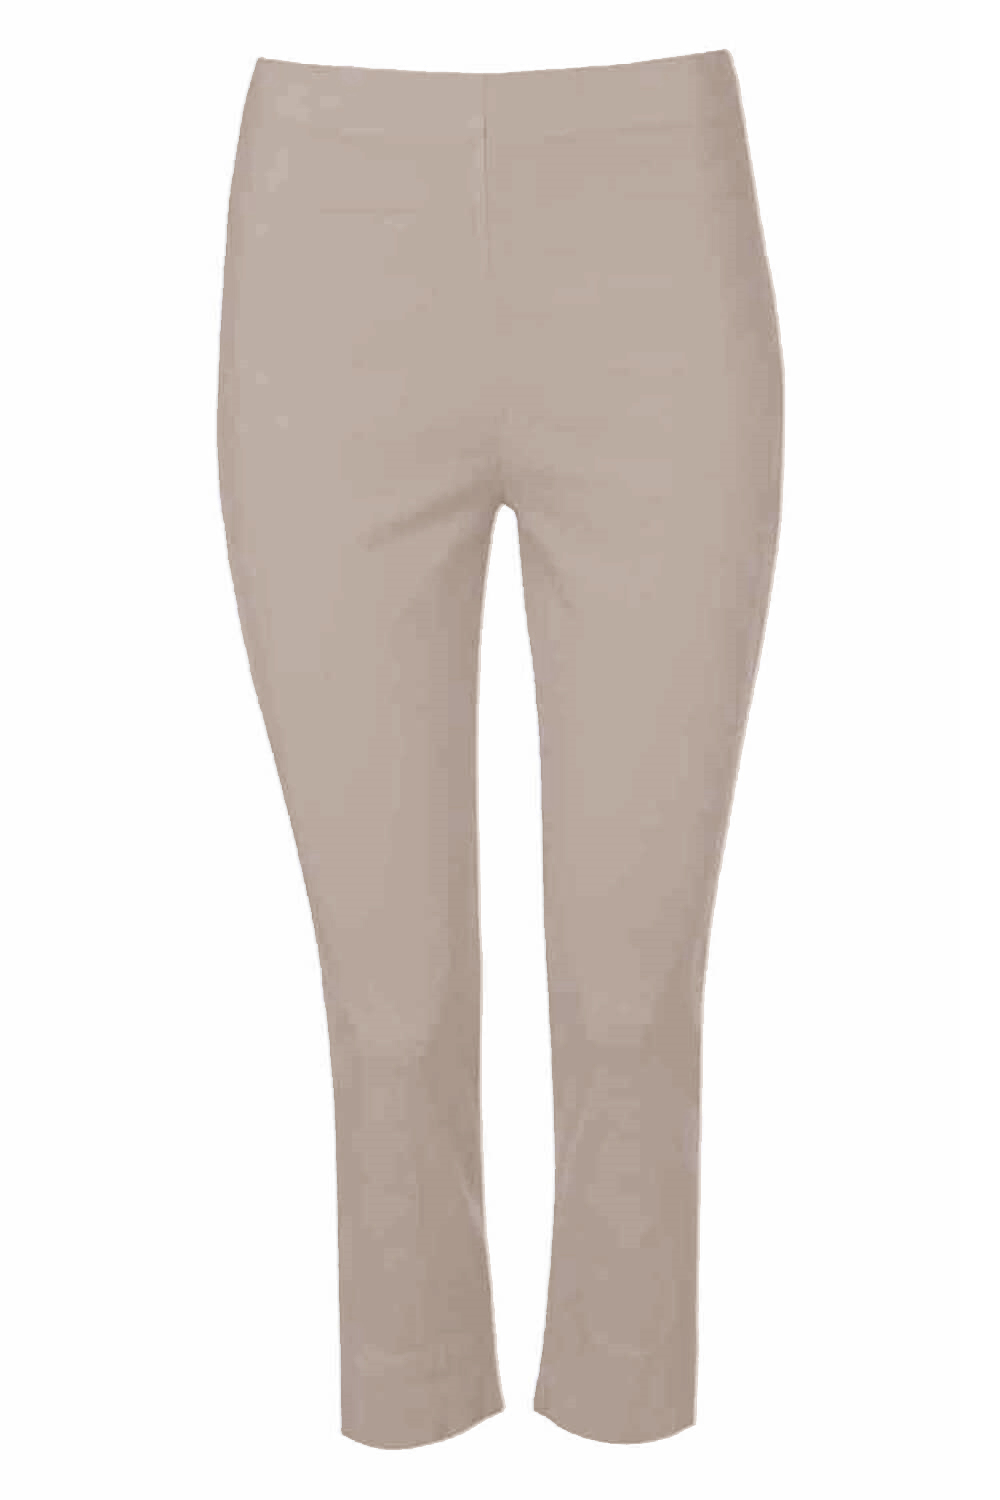 Taupe Cropped Stretch Trouser, Image 5 of 5